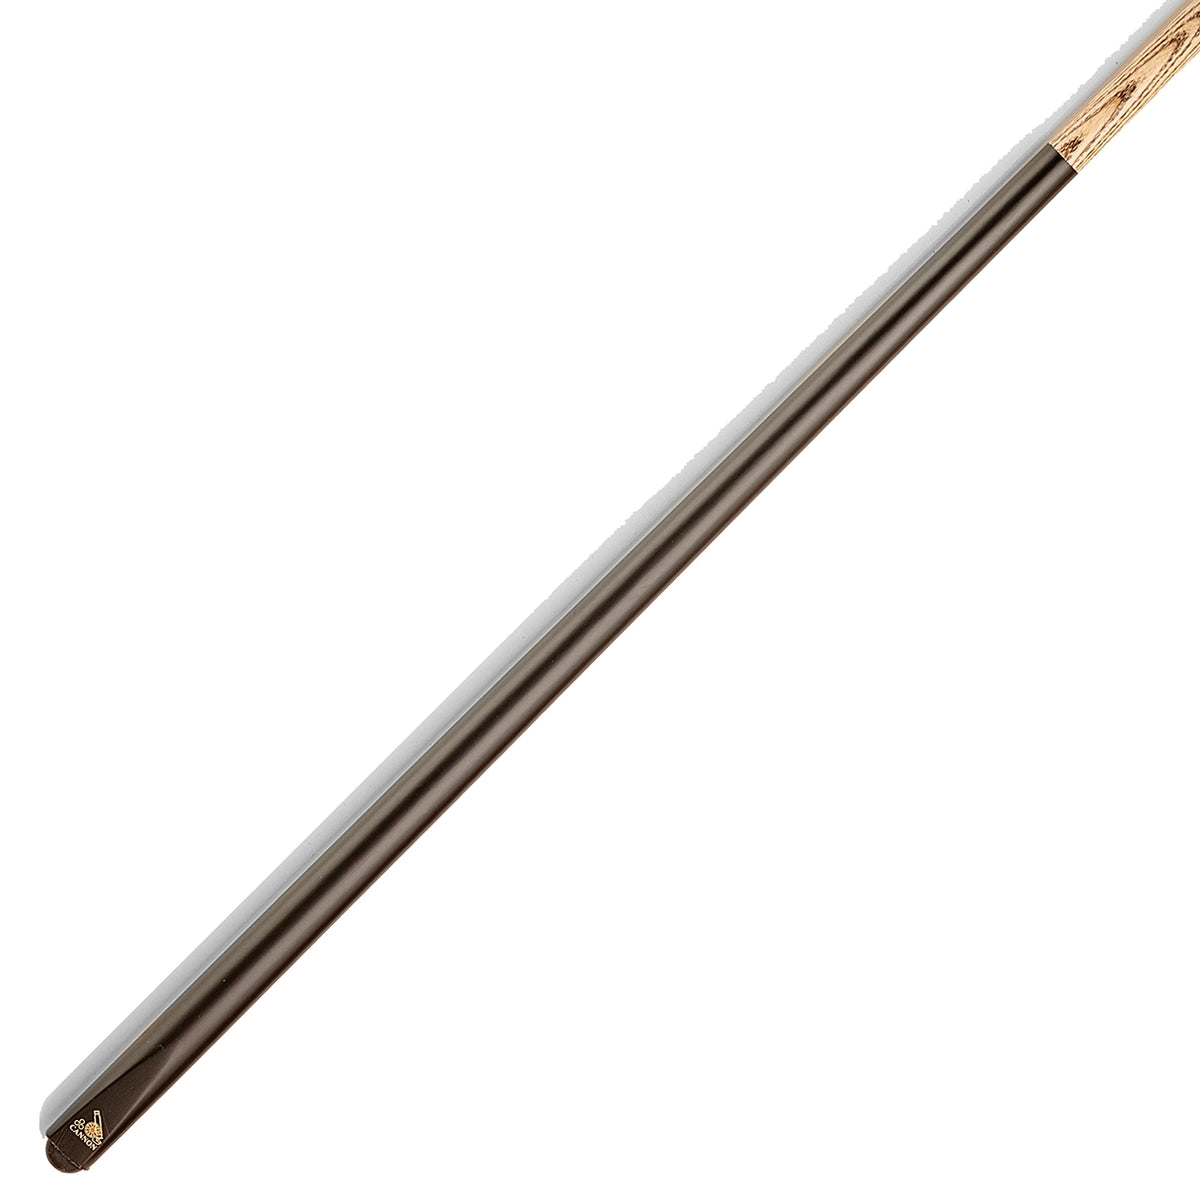 Cannon Club Cue. On angle view